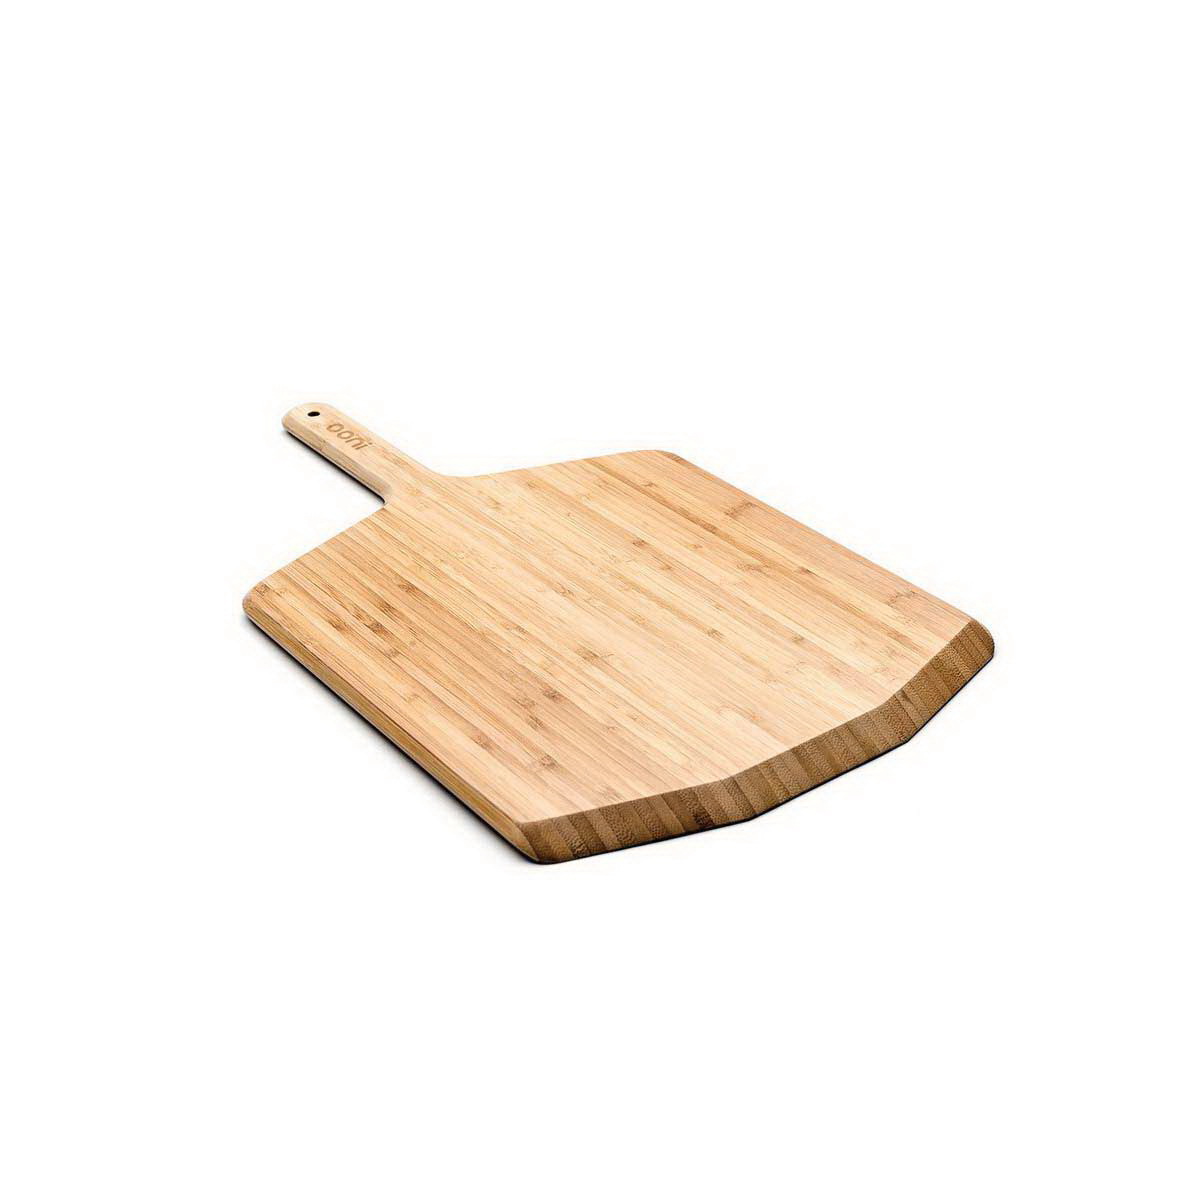 UU-P08200 Pizza Peel and Serving Board, Bamboo Blade, Brown Handle